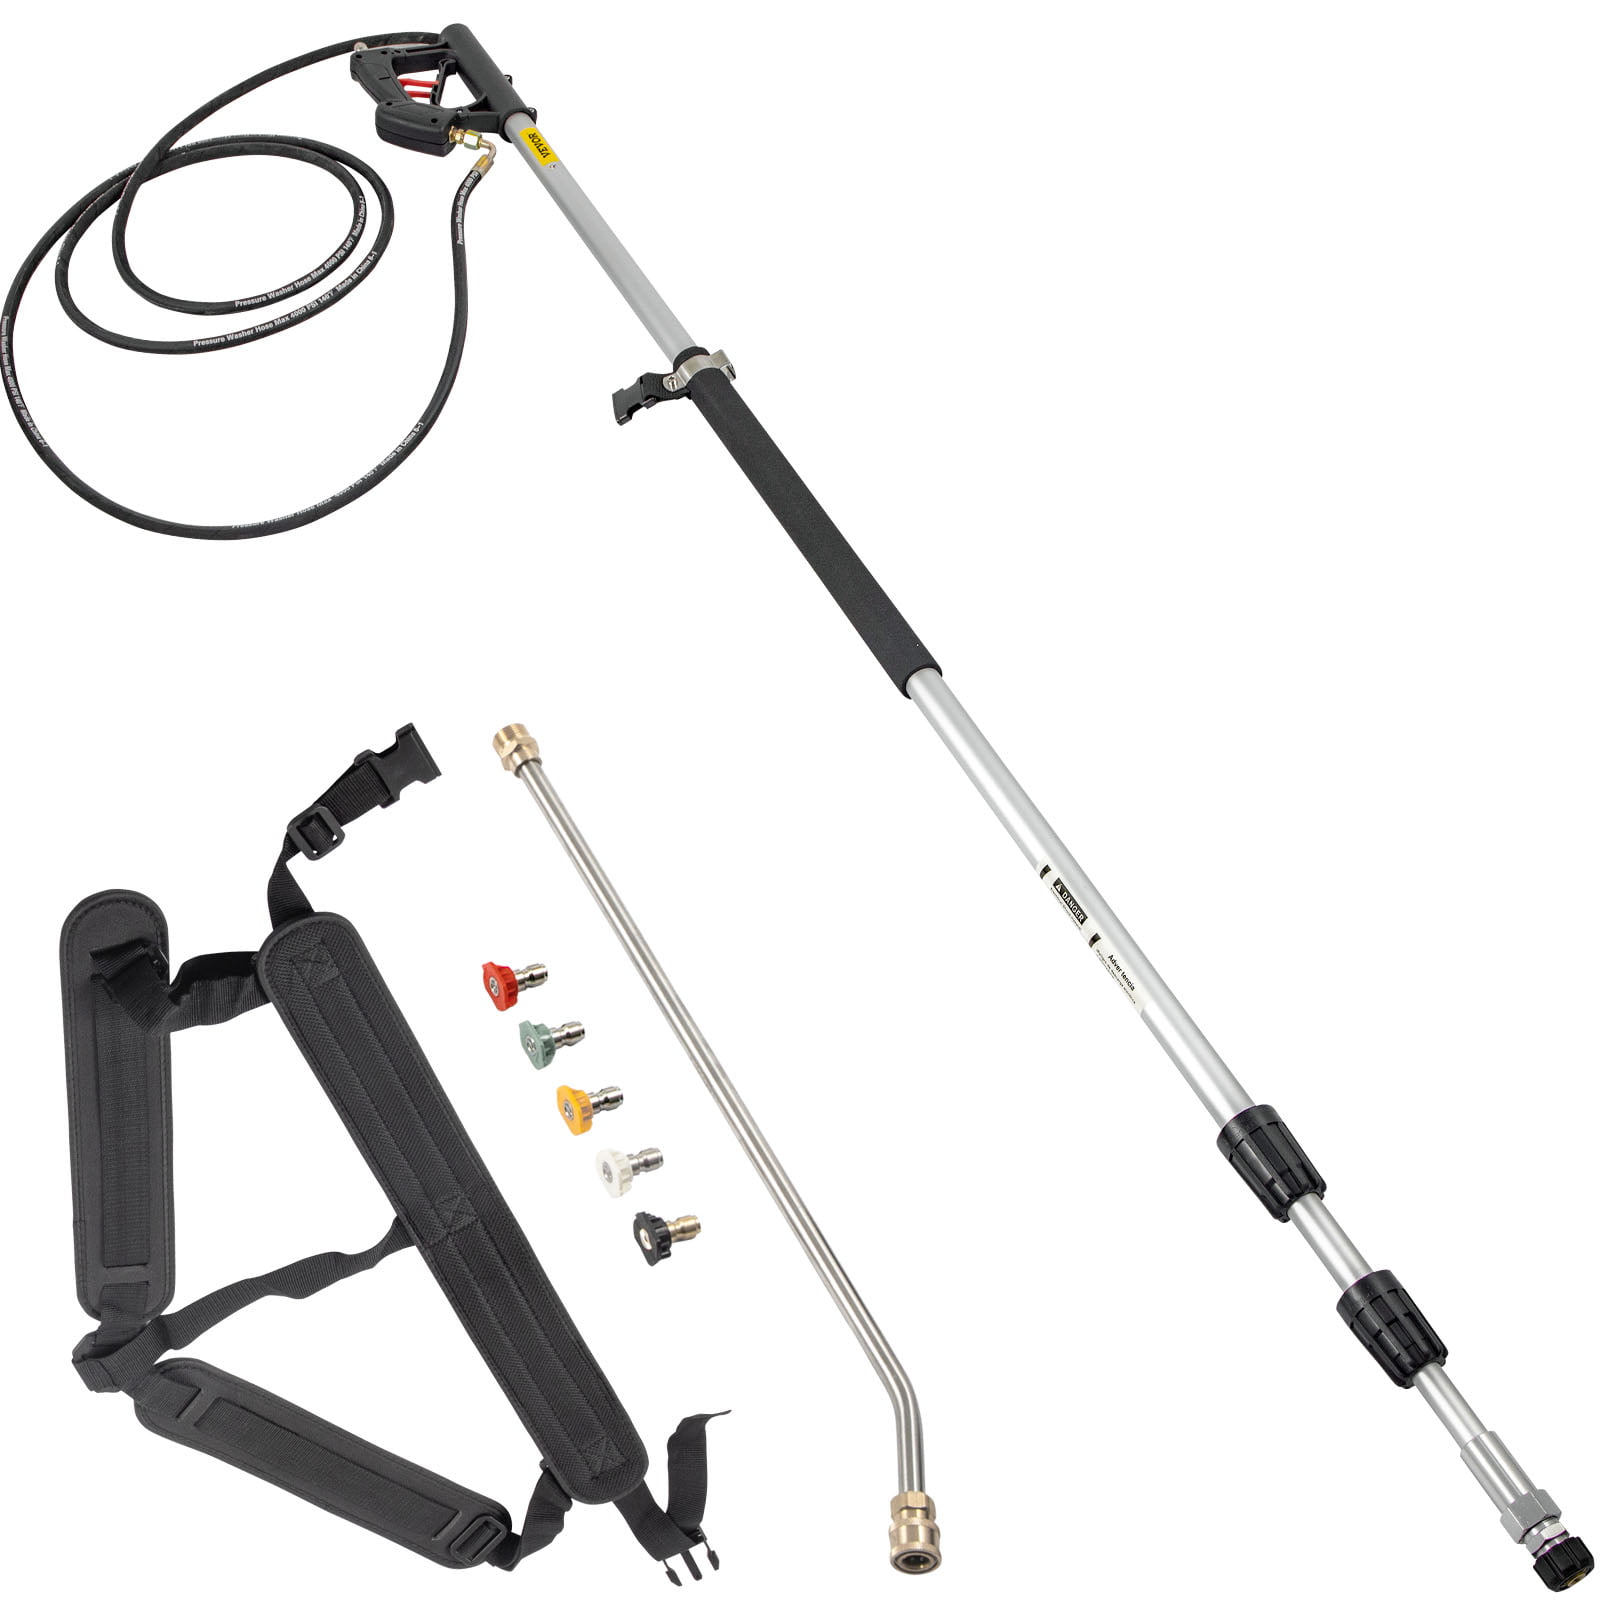 18ft Pressure Washing Telescopic Pole Extendable 1/4"M & Gutter Cleaning Tool 